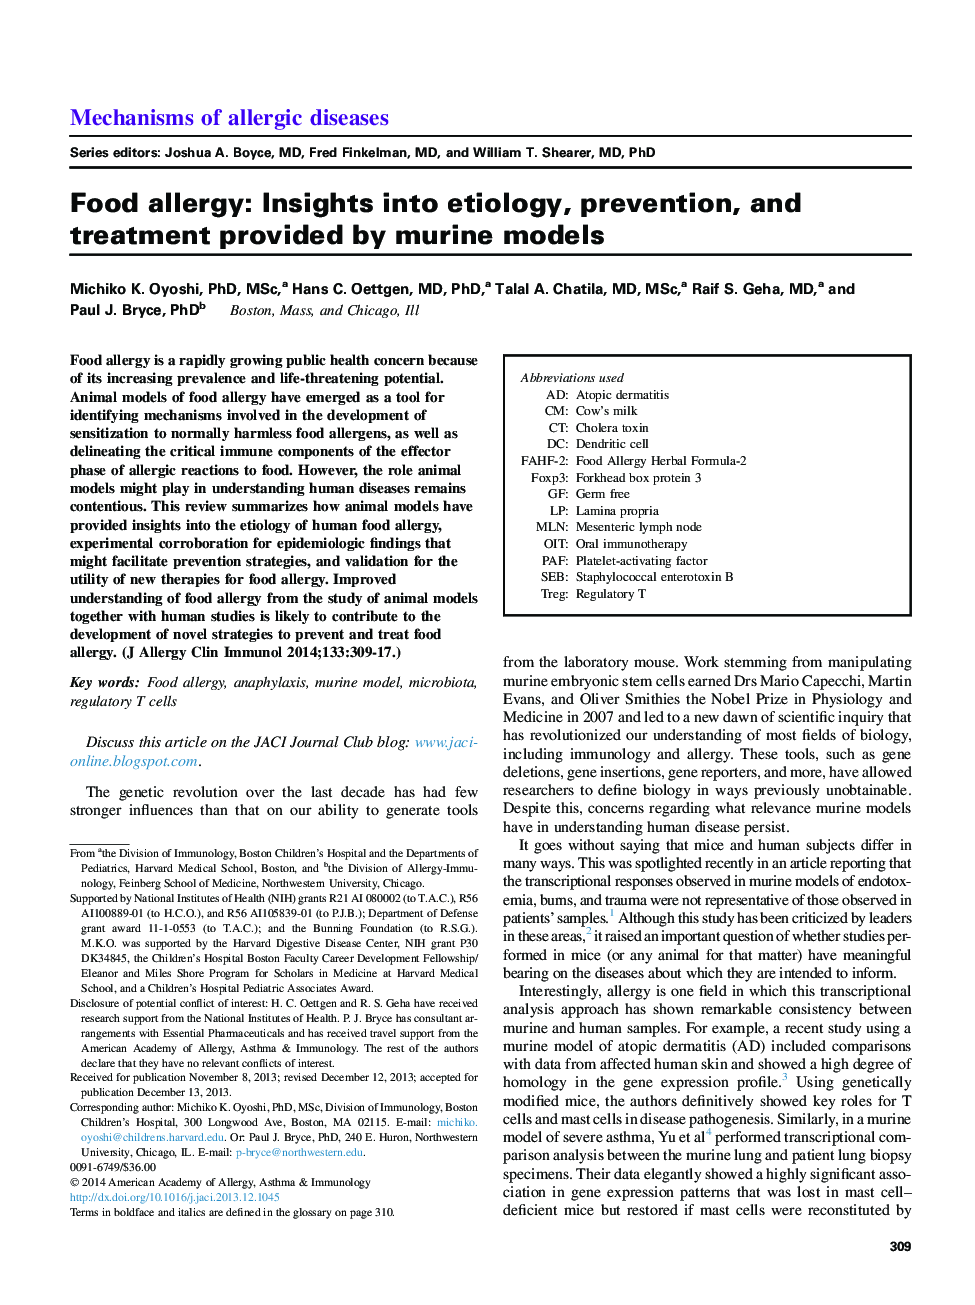 Food allergy: Insights into etiology, prevention, and treatment provided by murine models 